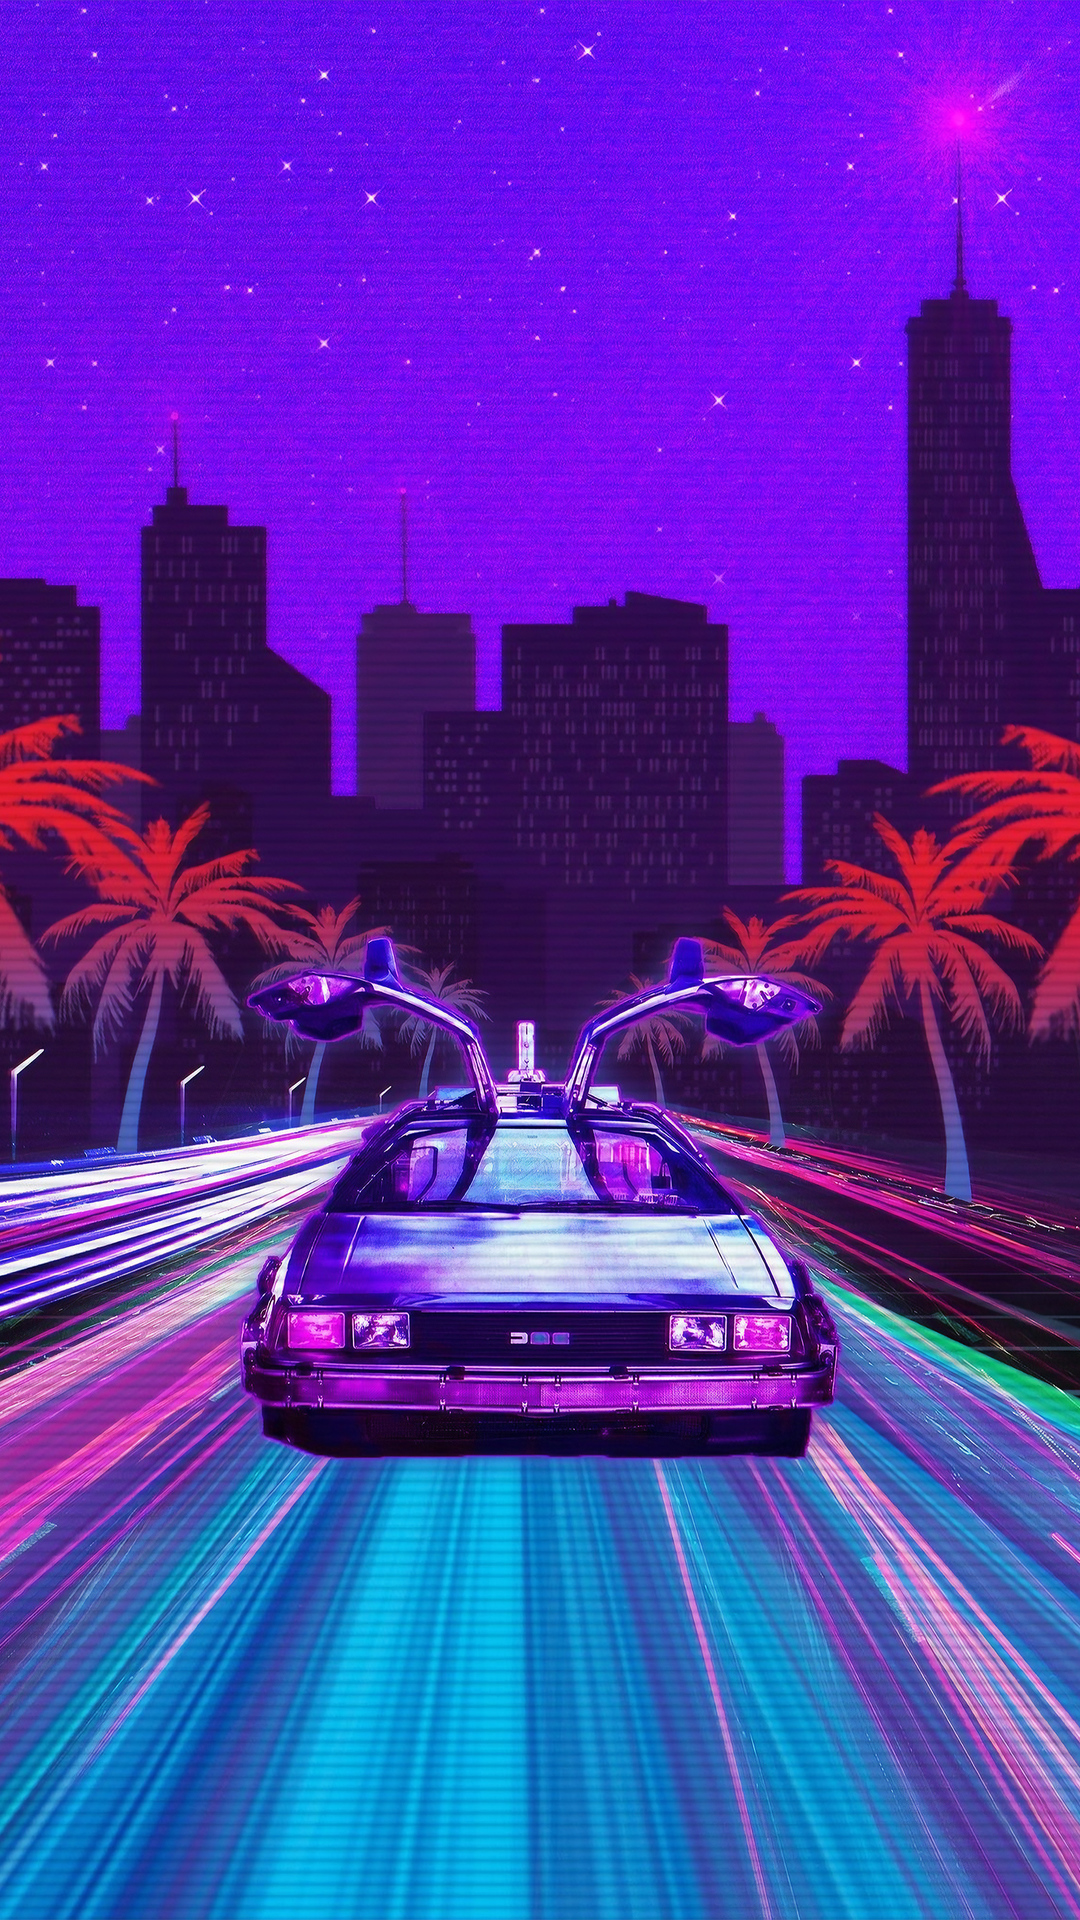 Retro style outrun wallpaper for phone in hd  HeroScreen Wallpapers   Vaporwave wallpaper Phone wallpaper Iphone wallpaper